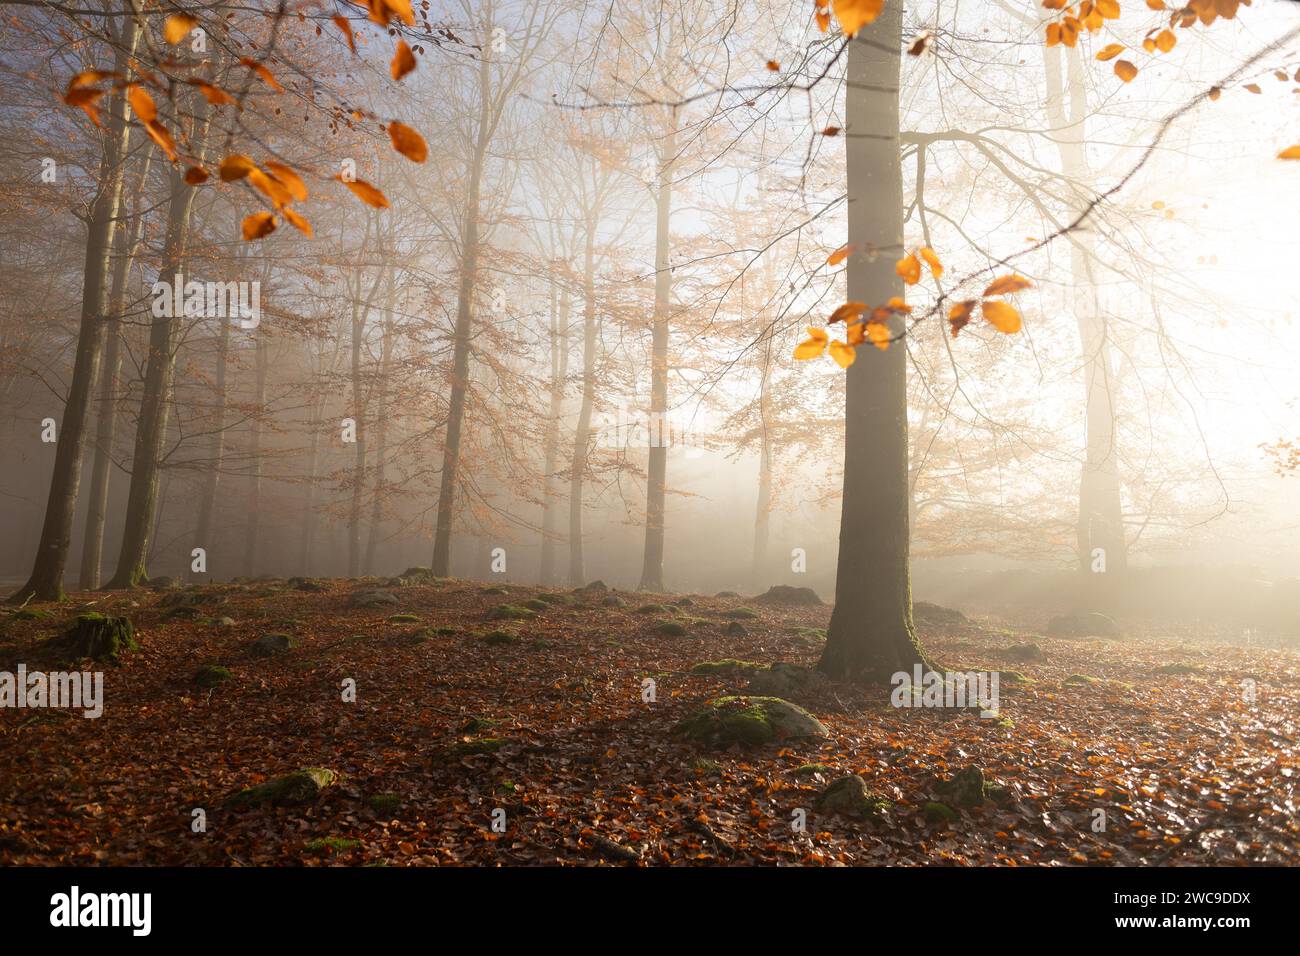 A natural landscape of the forest covered with a blanket of golden leaves and trees shrouded in fog Stock Photo